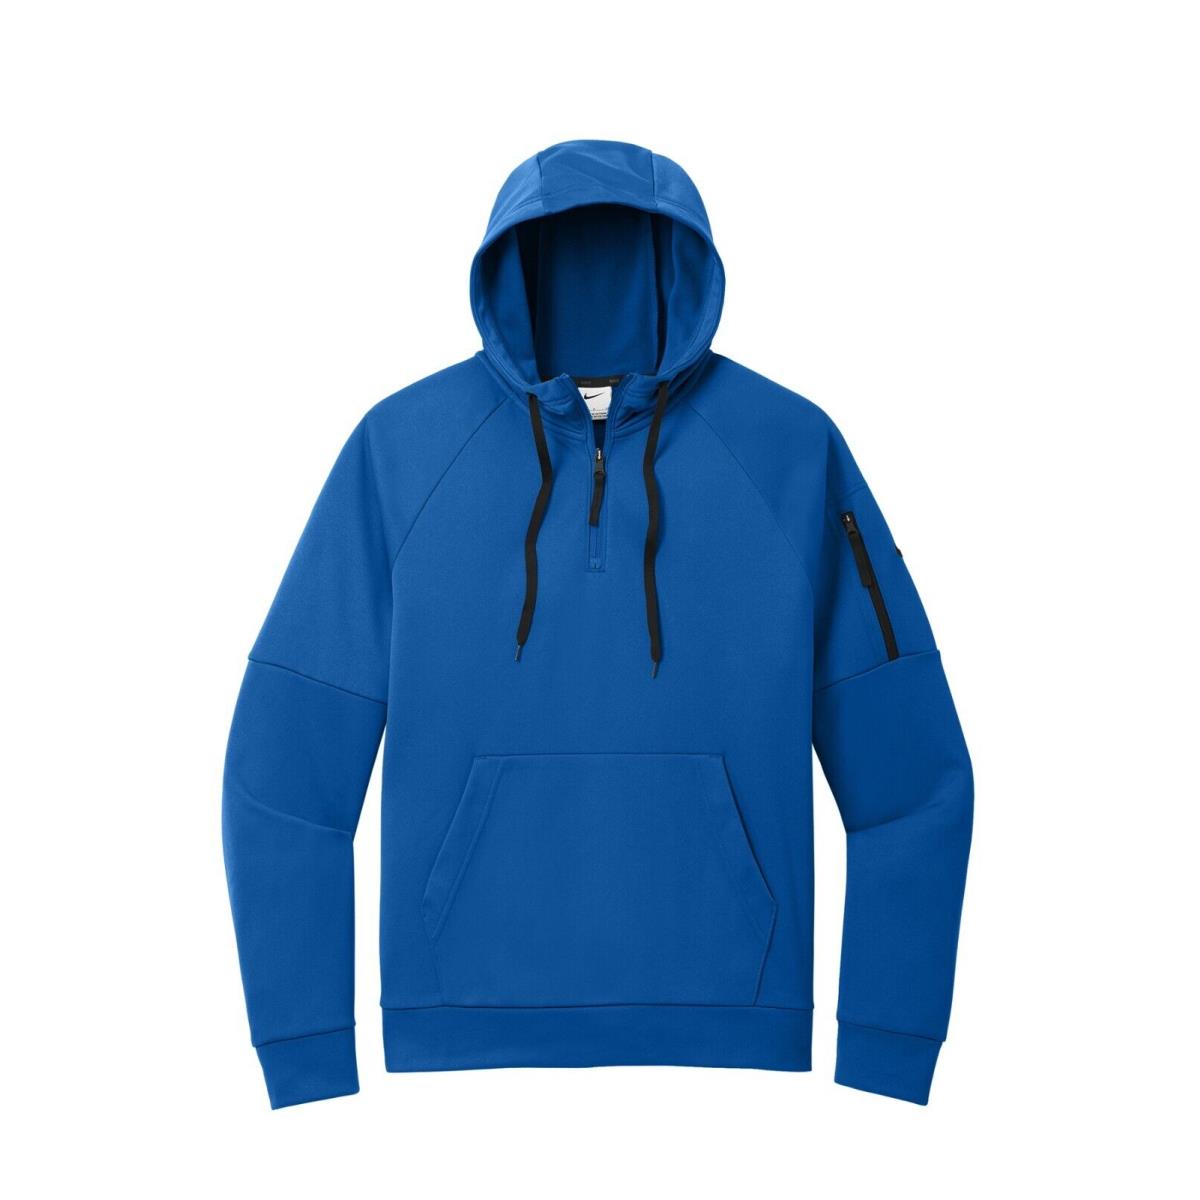 Nike Men`s Therma-fit 1/4 Zip Fleece Pullover Drawcord Hood Arm Pocket XS-4XL Game Royal